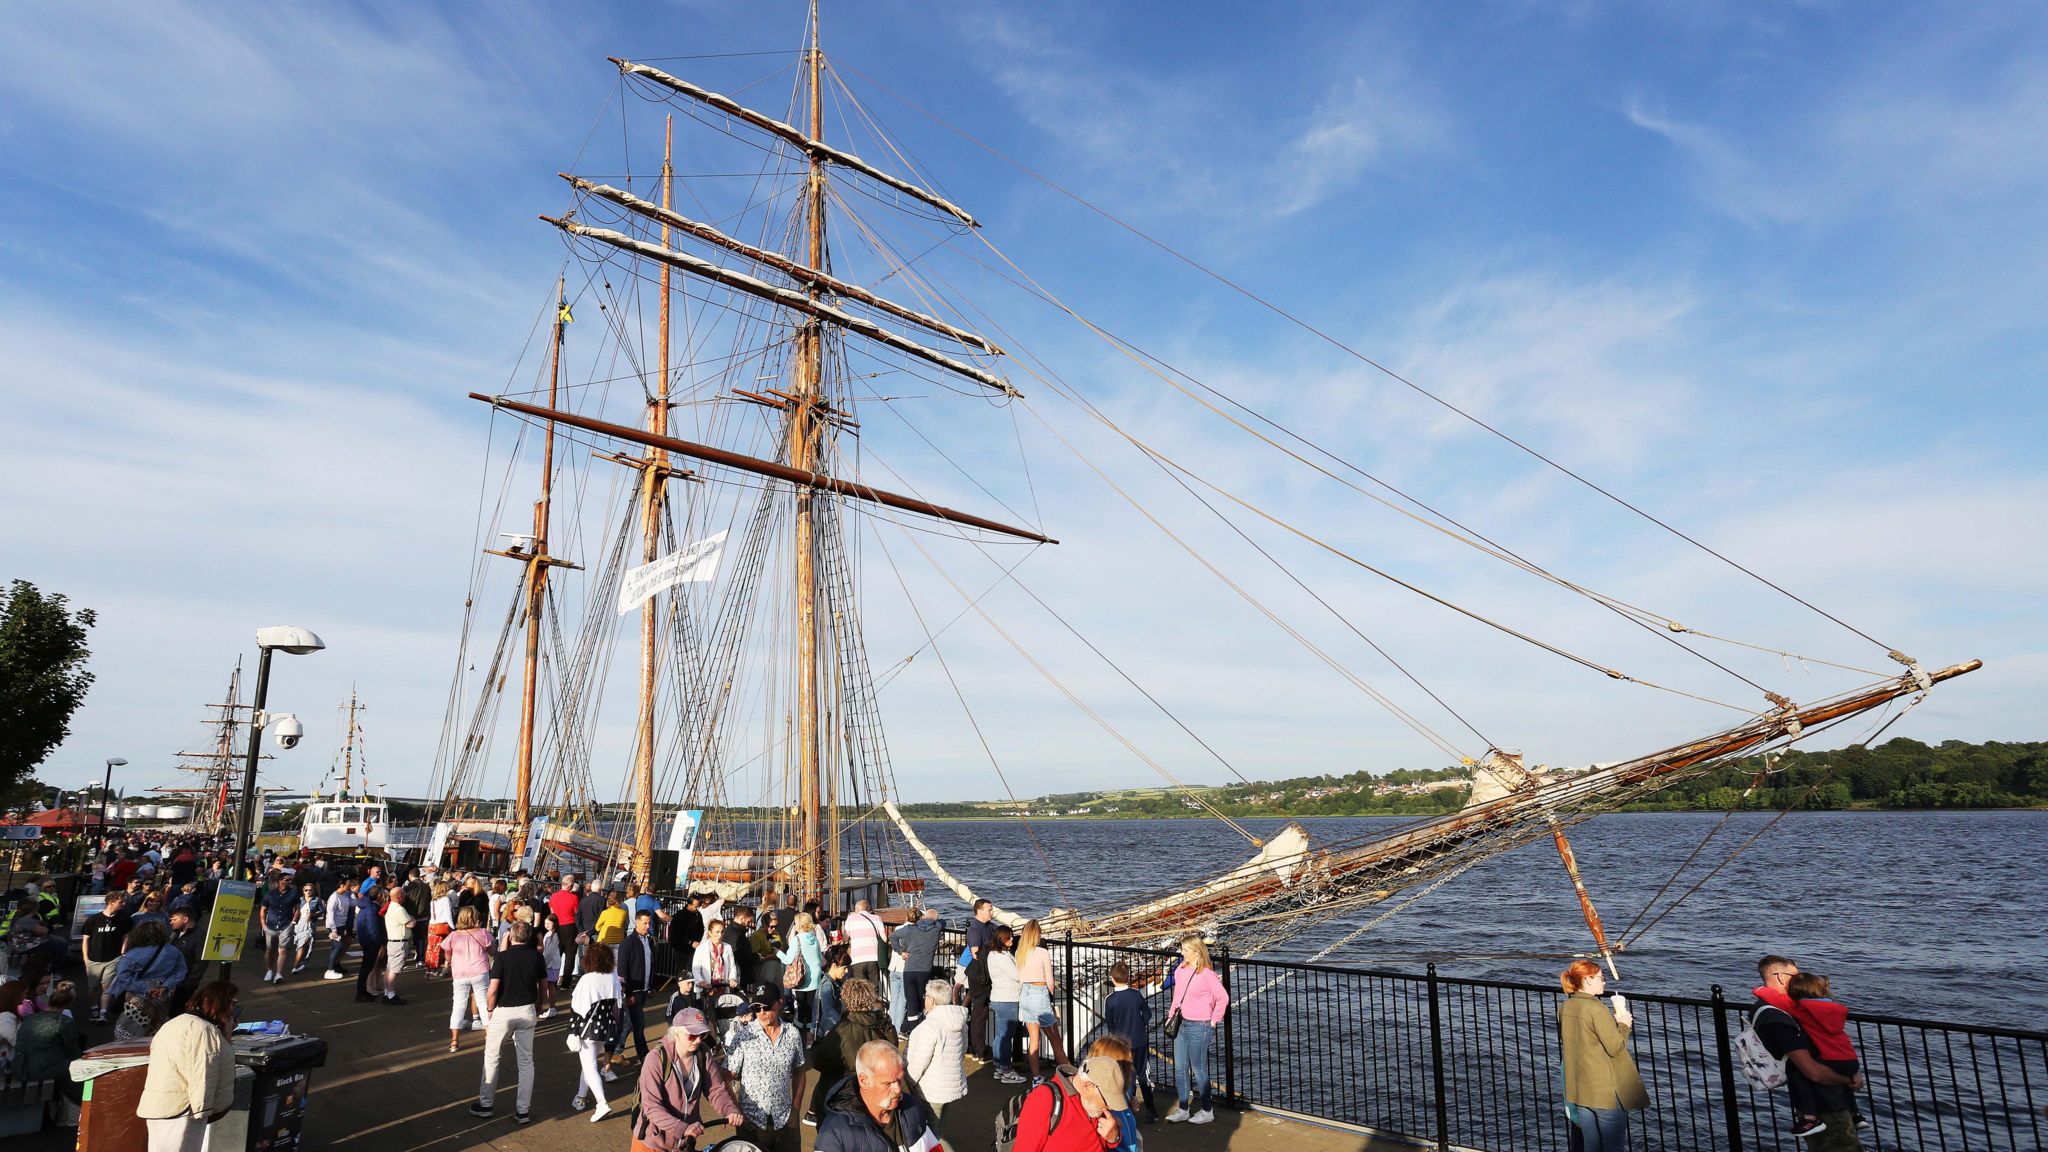 One of the tall ships berthed in Derry for the martime festival, with people walking past in the foreground